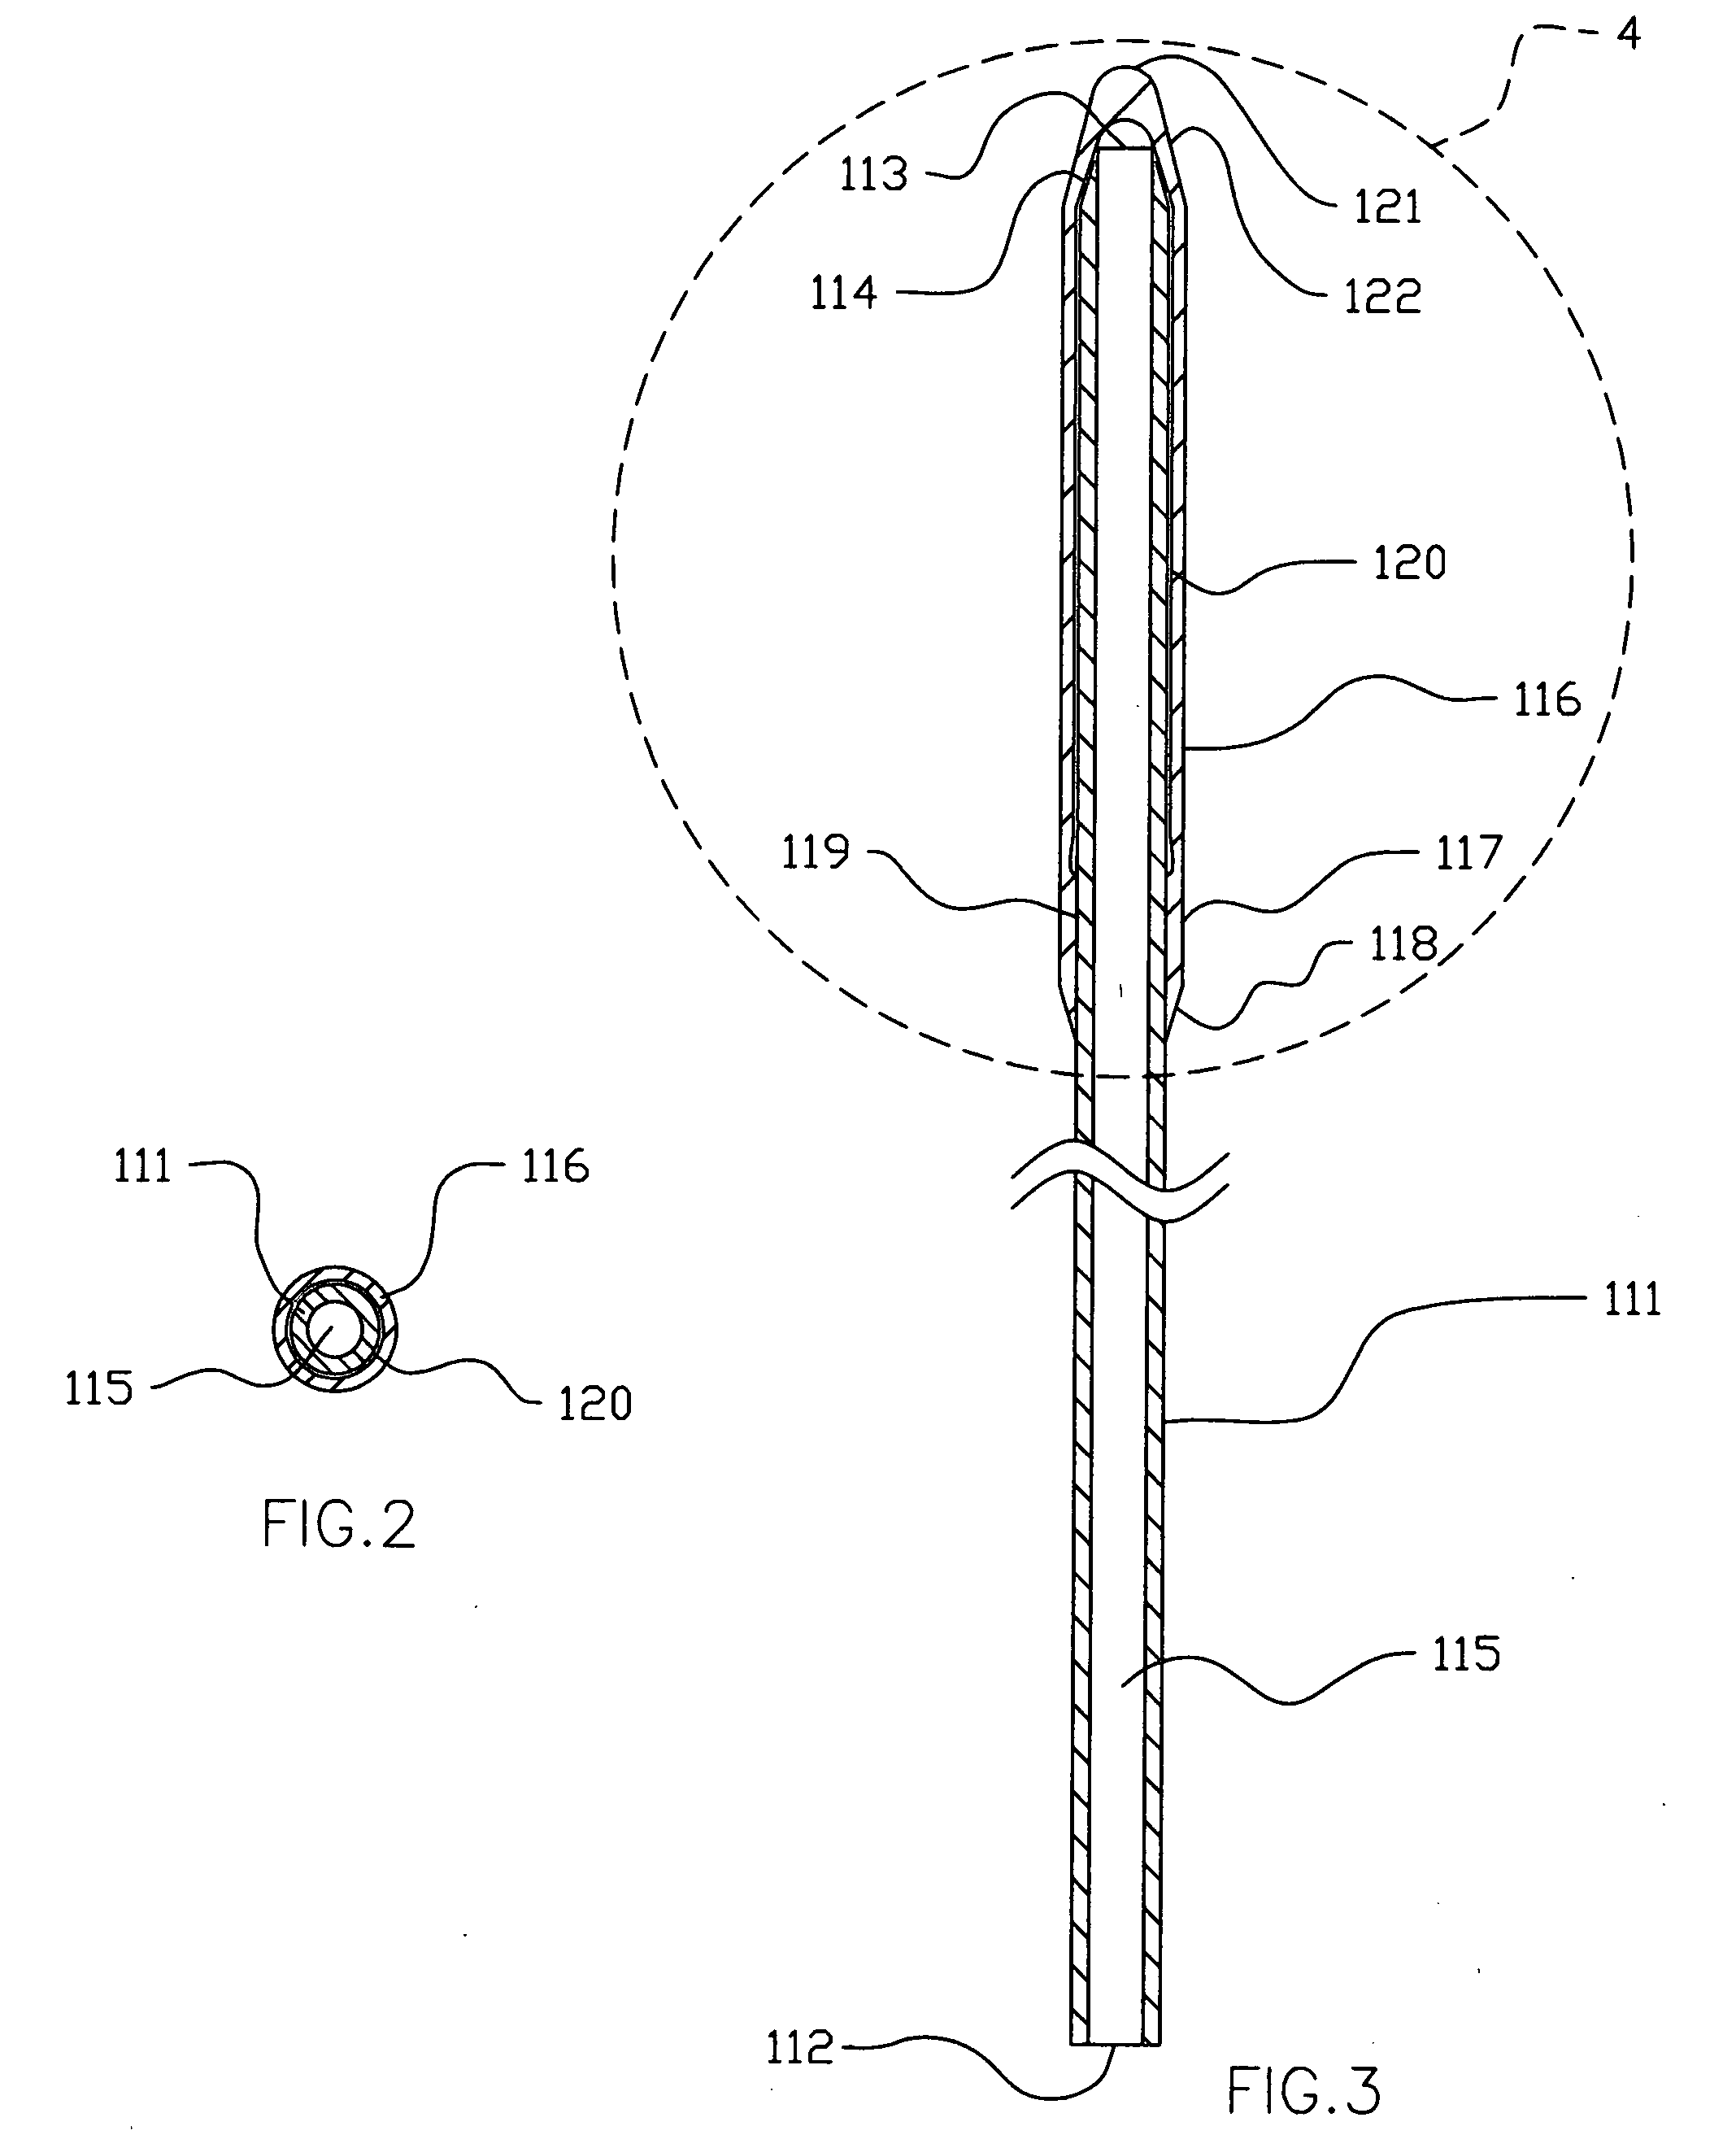 Exercise device and method for testing and/or strengthening muscles of the pelvic diaphragm